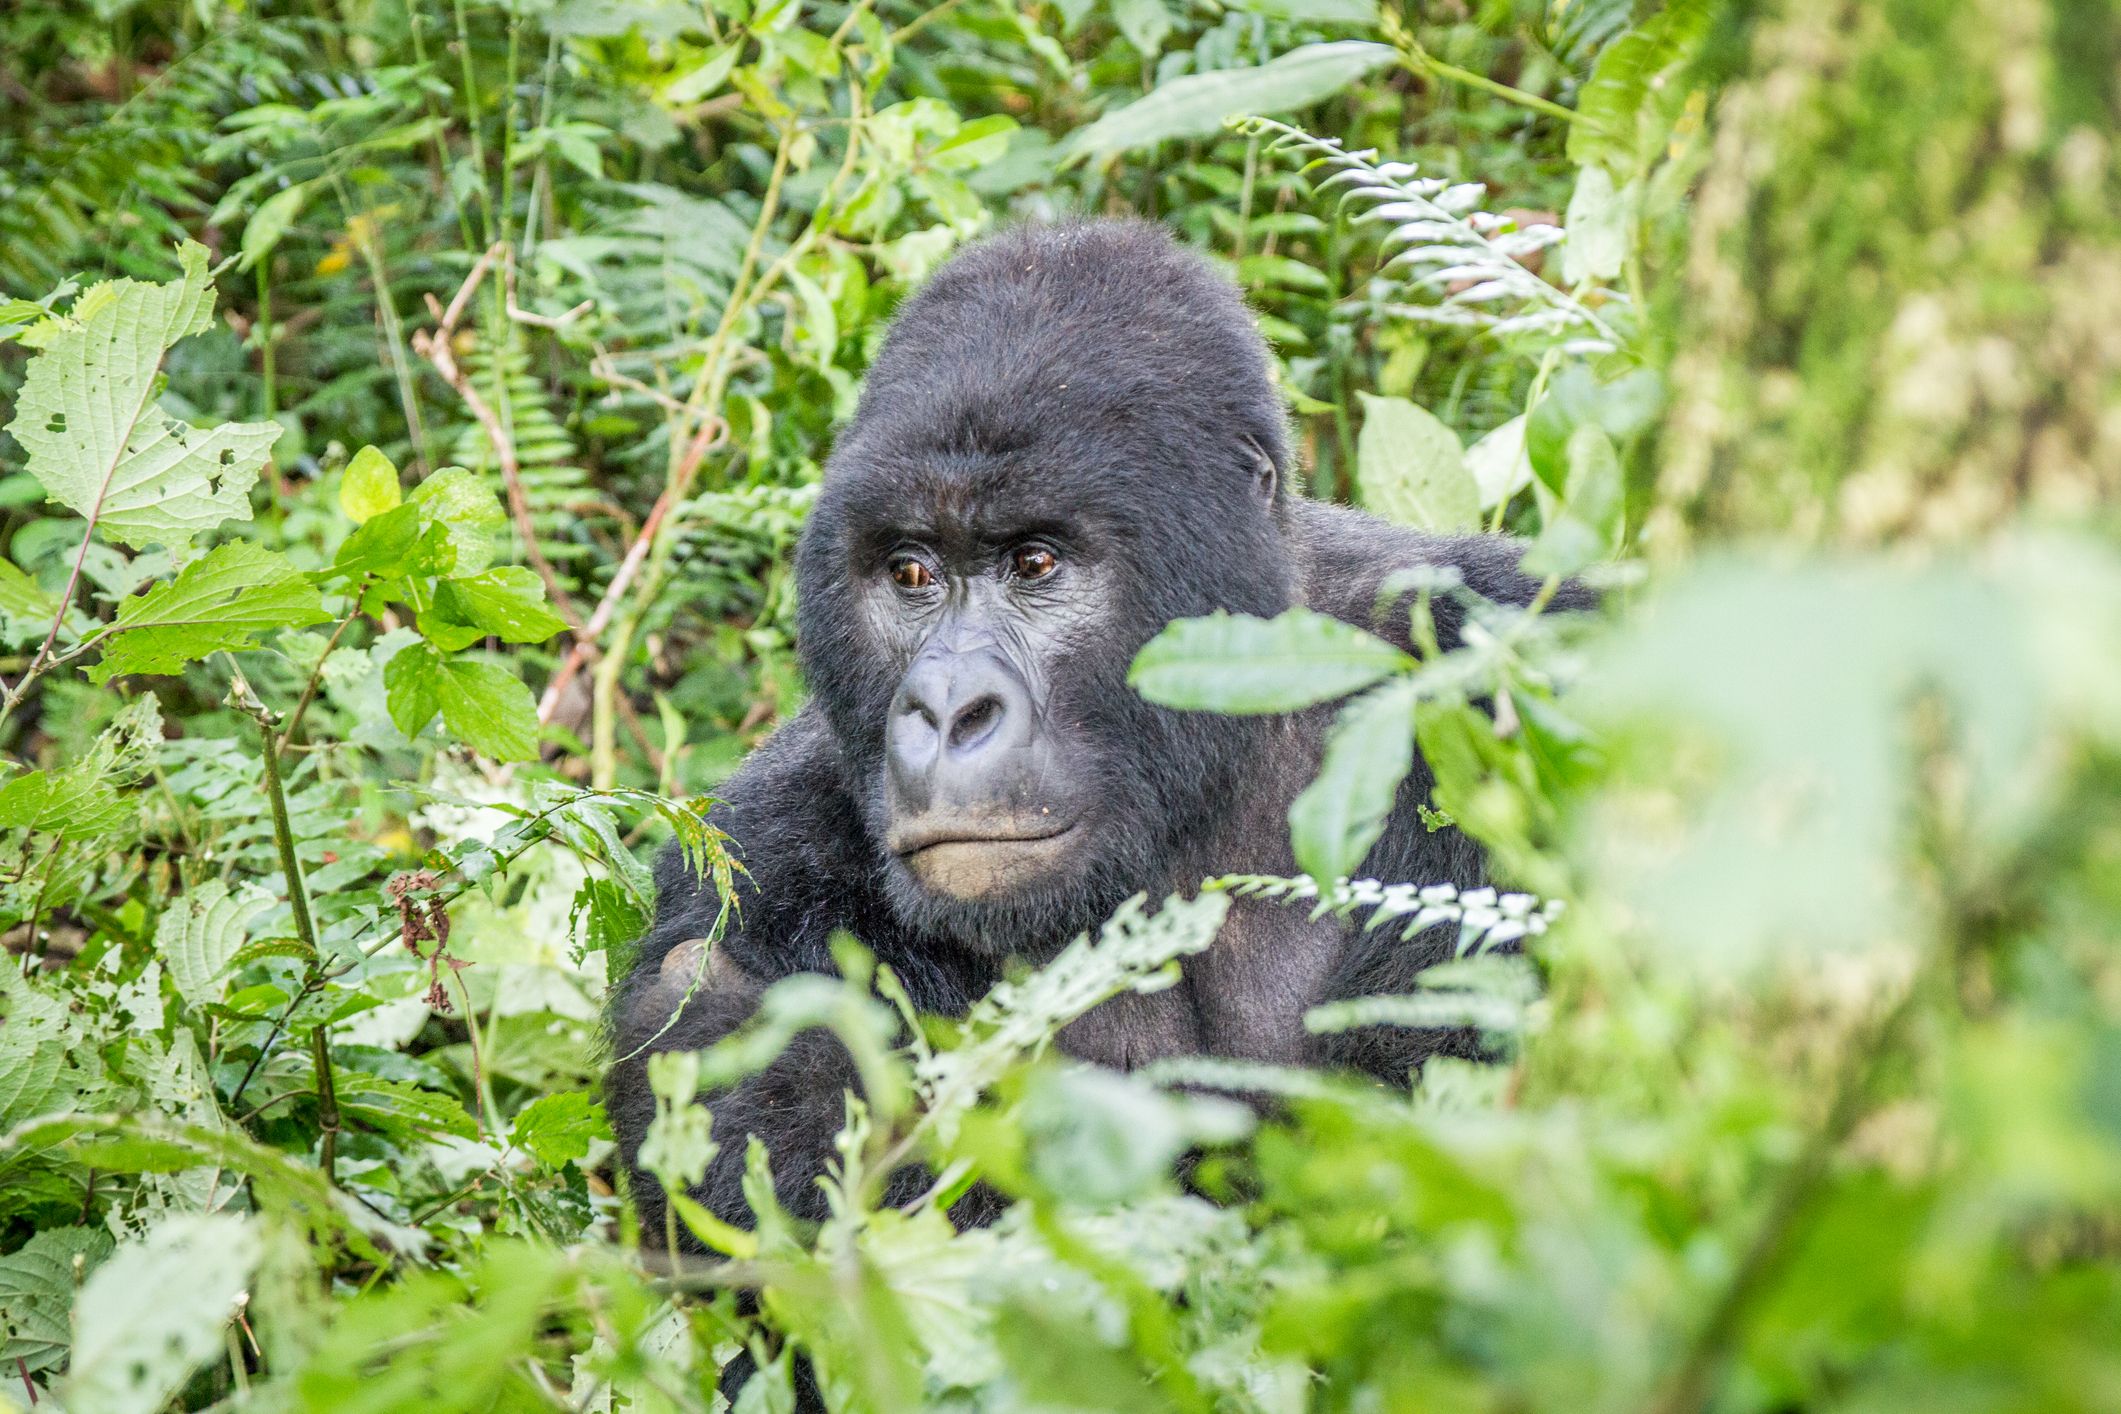 Photo of a gorilla in the Virunga National Park in the DRC